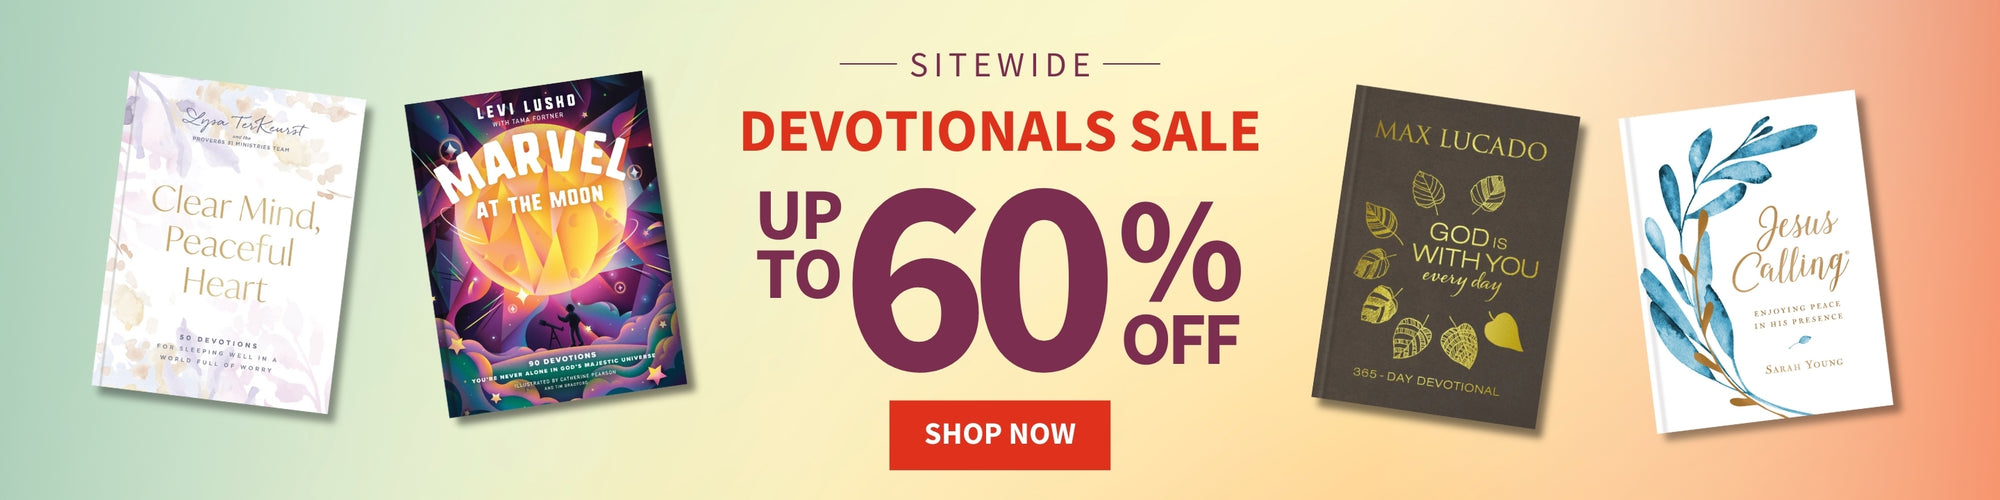 Sitewide Devotionals Sale Up to 60% Off - Shop Now